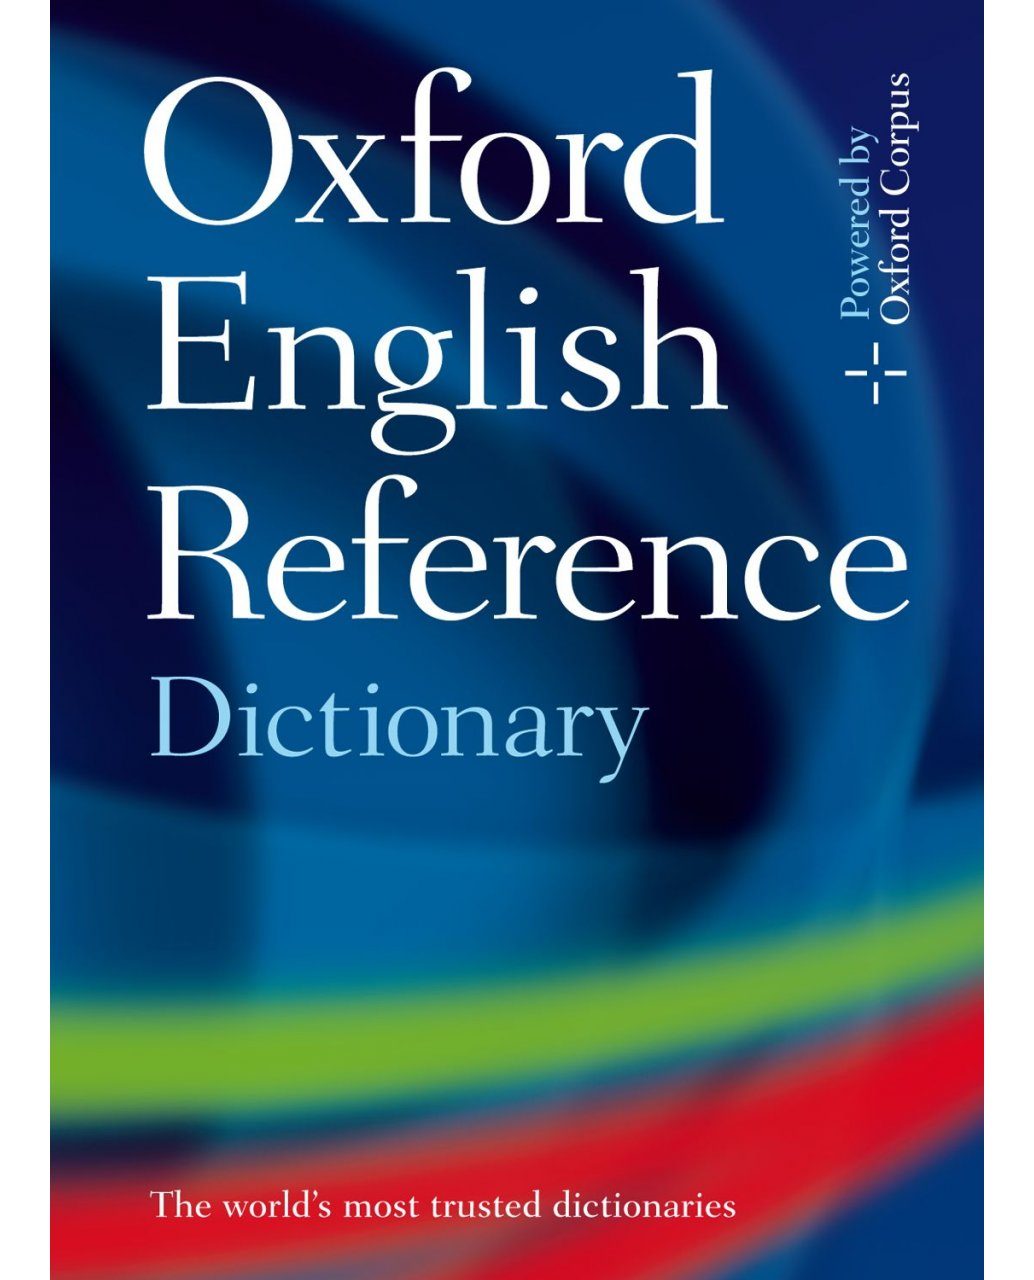 The new english dictionary. Oxford Dictionary. Словарь Oxford English. Oxford reference Dictionary. Английский словарь Оксфорд.